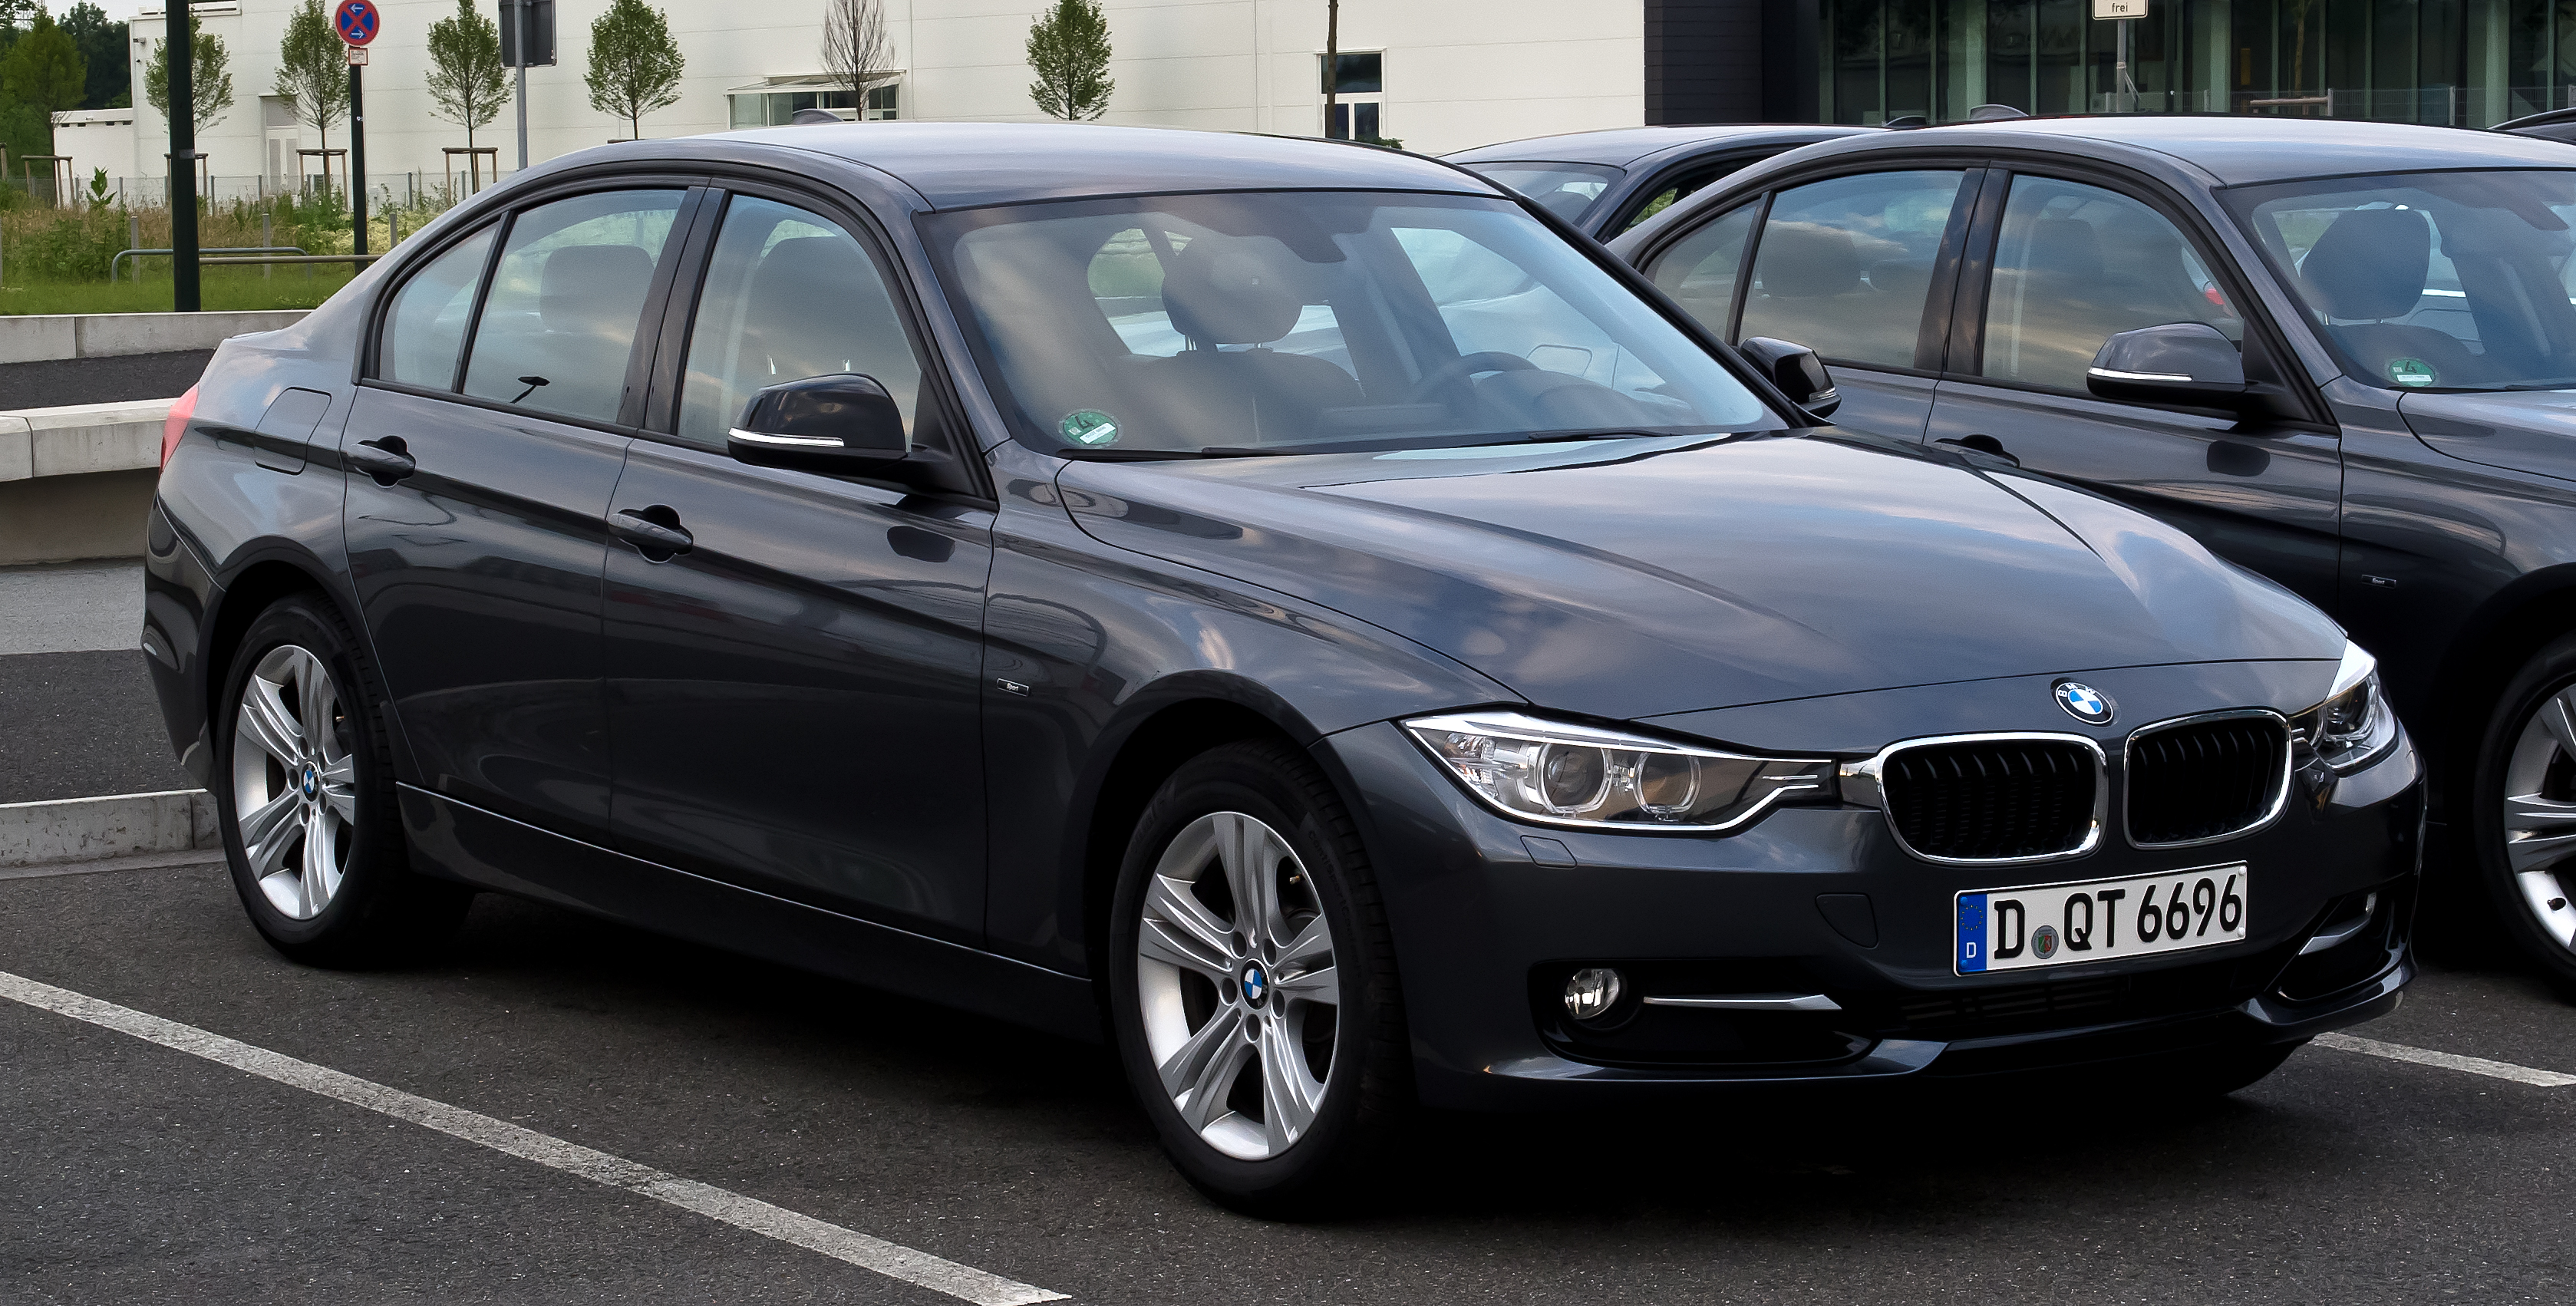 BMW Announces Long-Wheelbase F30 3-series For China, 54% OFF